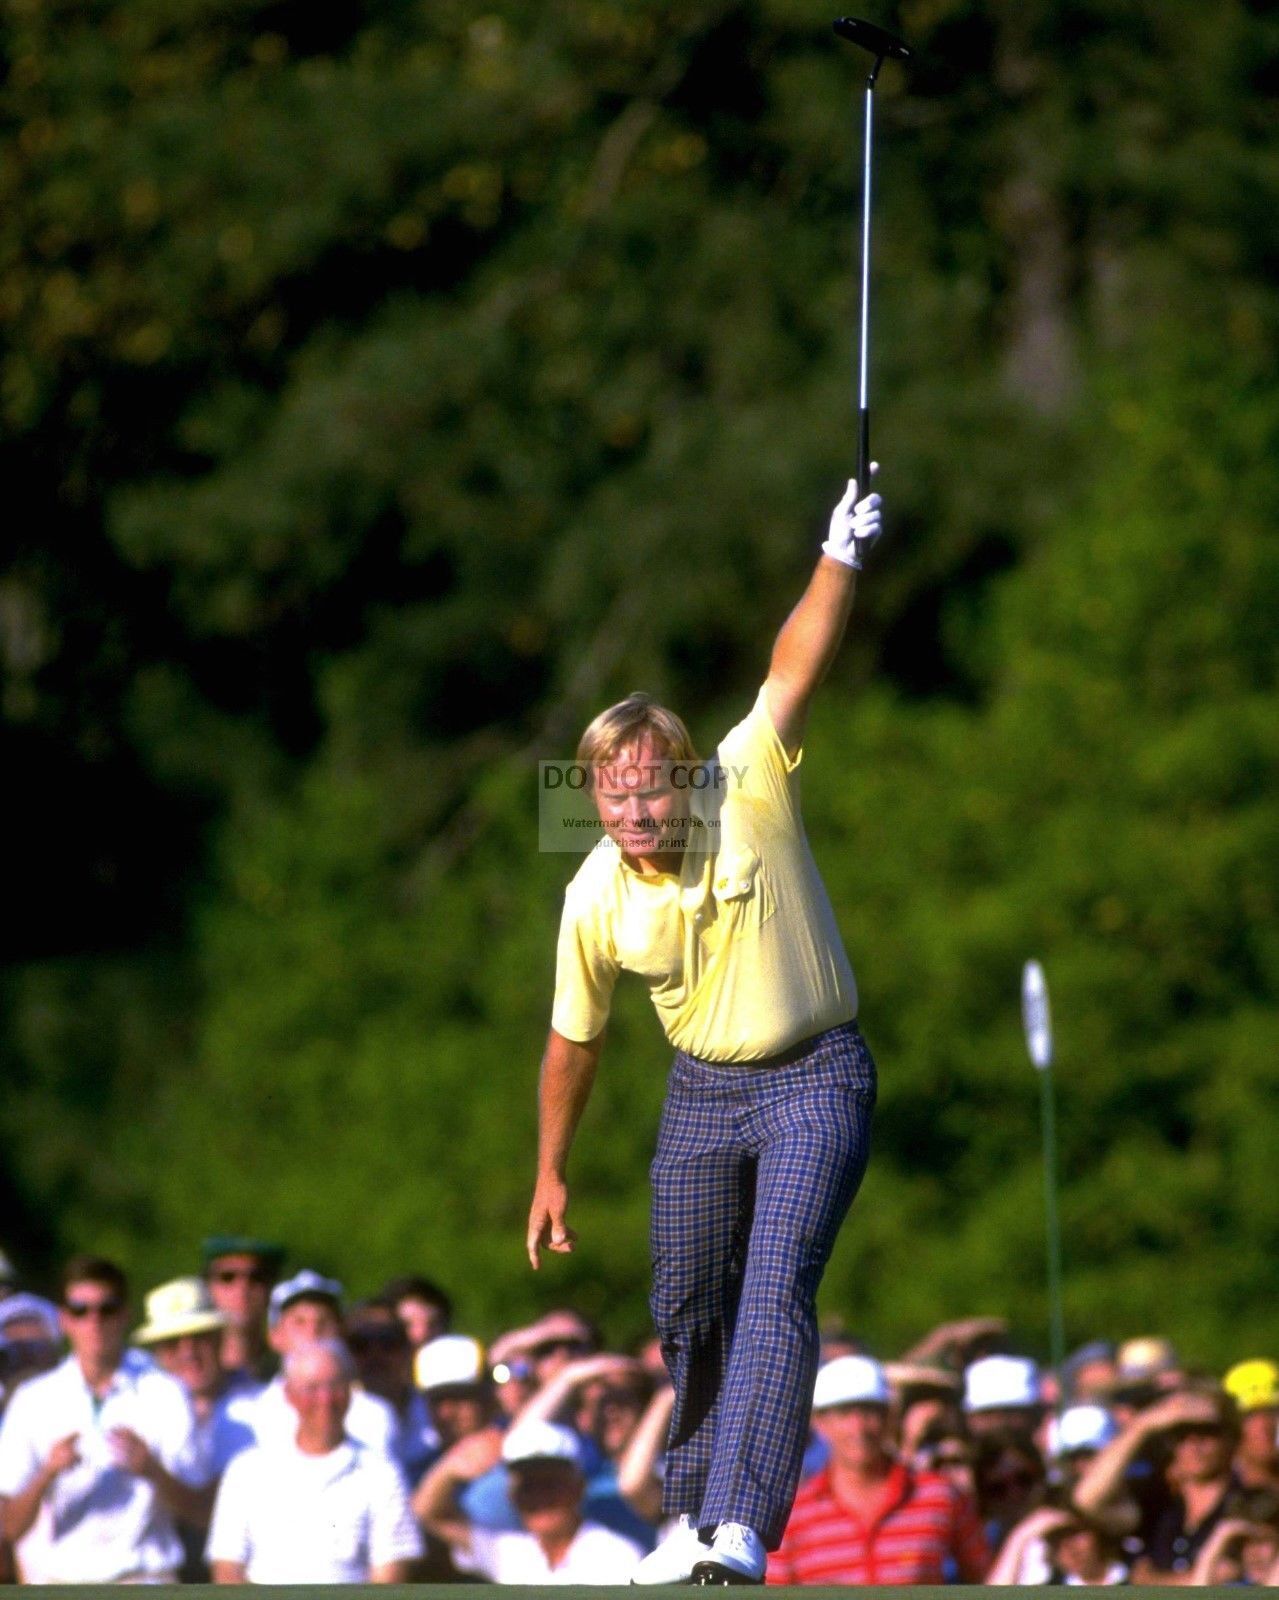 JACK NICKLAUS AT THE 1986 MASTERS GOLF TOURNAMENT - 8X10 SPORTS PHOTO (CC858)